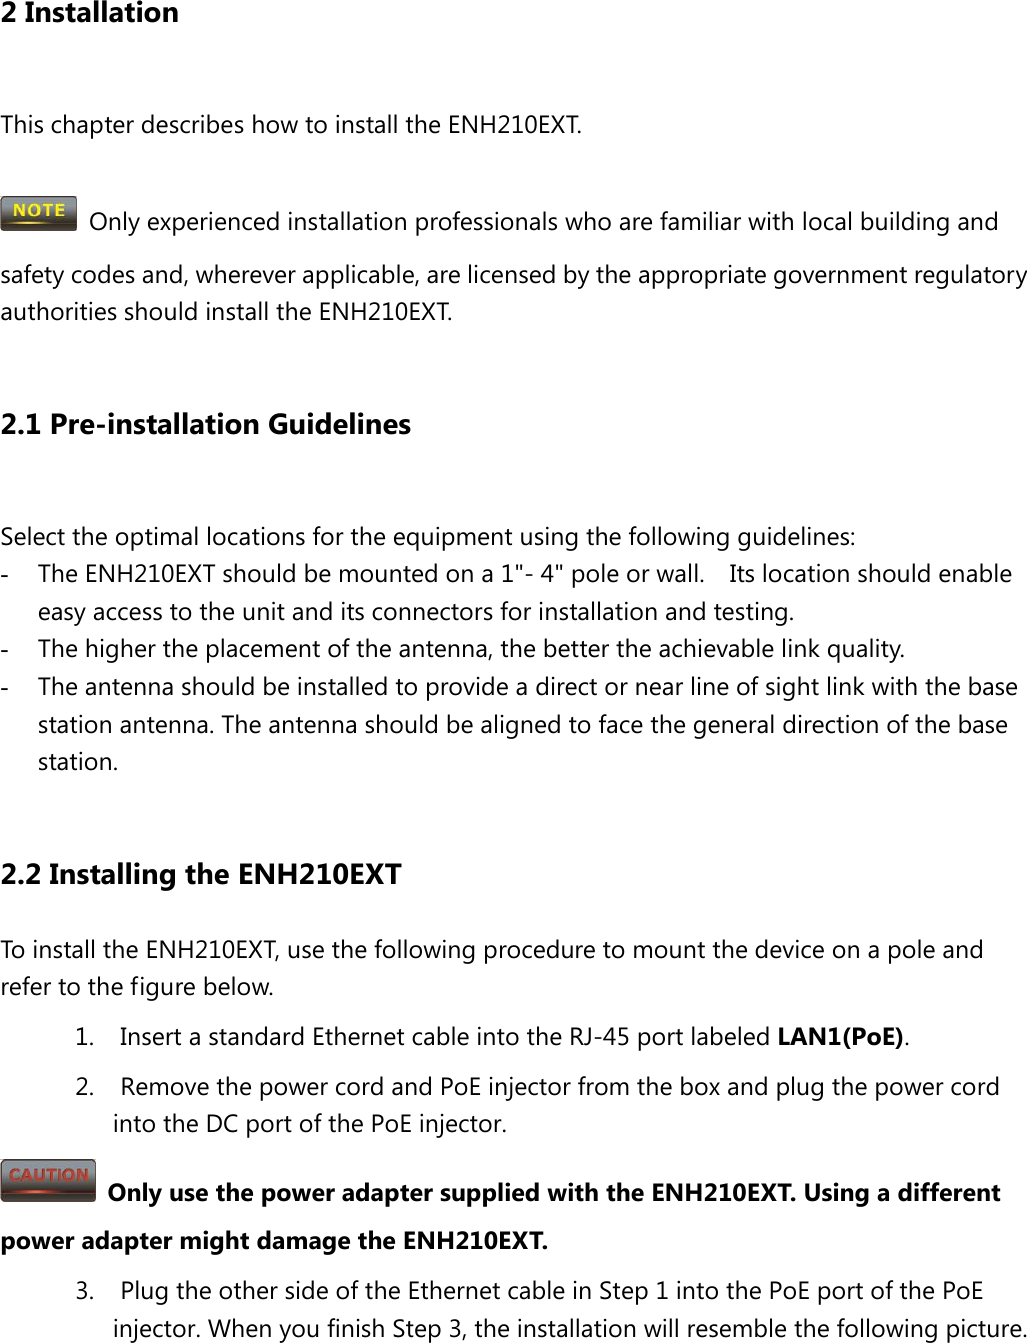   2 Installation  This chapter describes how to install the ENH210EXT.   Only experienced installation professionals who are familiar with local building and safety codes and, wherever applicable, are licensed by the appropriate government regulatory authorities should install the ENH210EXT.    2.1 Pre-installation Guidelines  Select the optimal locations for the equipment using the following guidelines: - The ENH210EXT should be mounted on a 1&quot;- 4&quot; pole or wall.   Its location should enable easy access to the unit and its connectors for installation and testing. - The higher the placement of the antenna, the better the achievable link quality. - The antenna should be installed to provide a direct or near line of sight link with the base station antenna. The antenna should be aligned to face the general direction of the base station.  2.2 Installing the ENH210EXT To install the ENH210EXT, use the following procedure to mount the device on a pole and refer to the figure below. 1. Insert a standard Ethernet cable into the RJ-45 port labeled LAN1(PoE). 2. Remove the power cord and PoE injector from the box and plug the power cord into the DC port of the PoE injector.  Only use the power adapter supplied with the ENH210EXT. Using a different power adapter might damage the ENH210EXT. 3. Plug the other side of the Ethernet cable in Step 1 into the PoE port of the PoE injector. When you finish Step 3, the installation will resemble the following picture. 